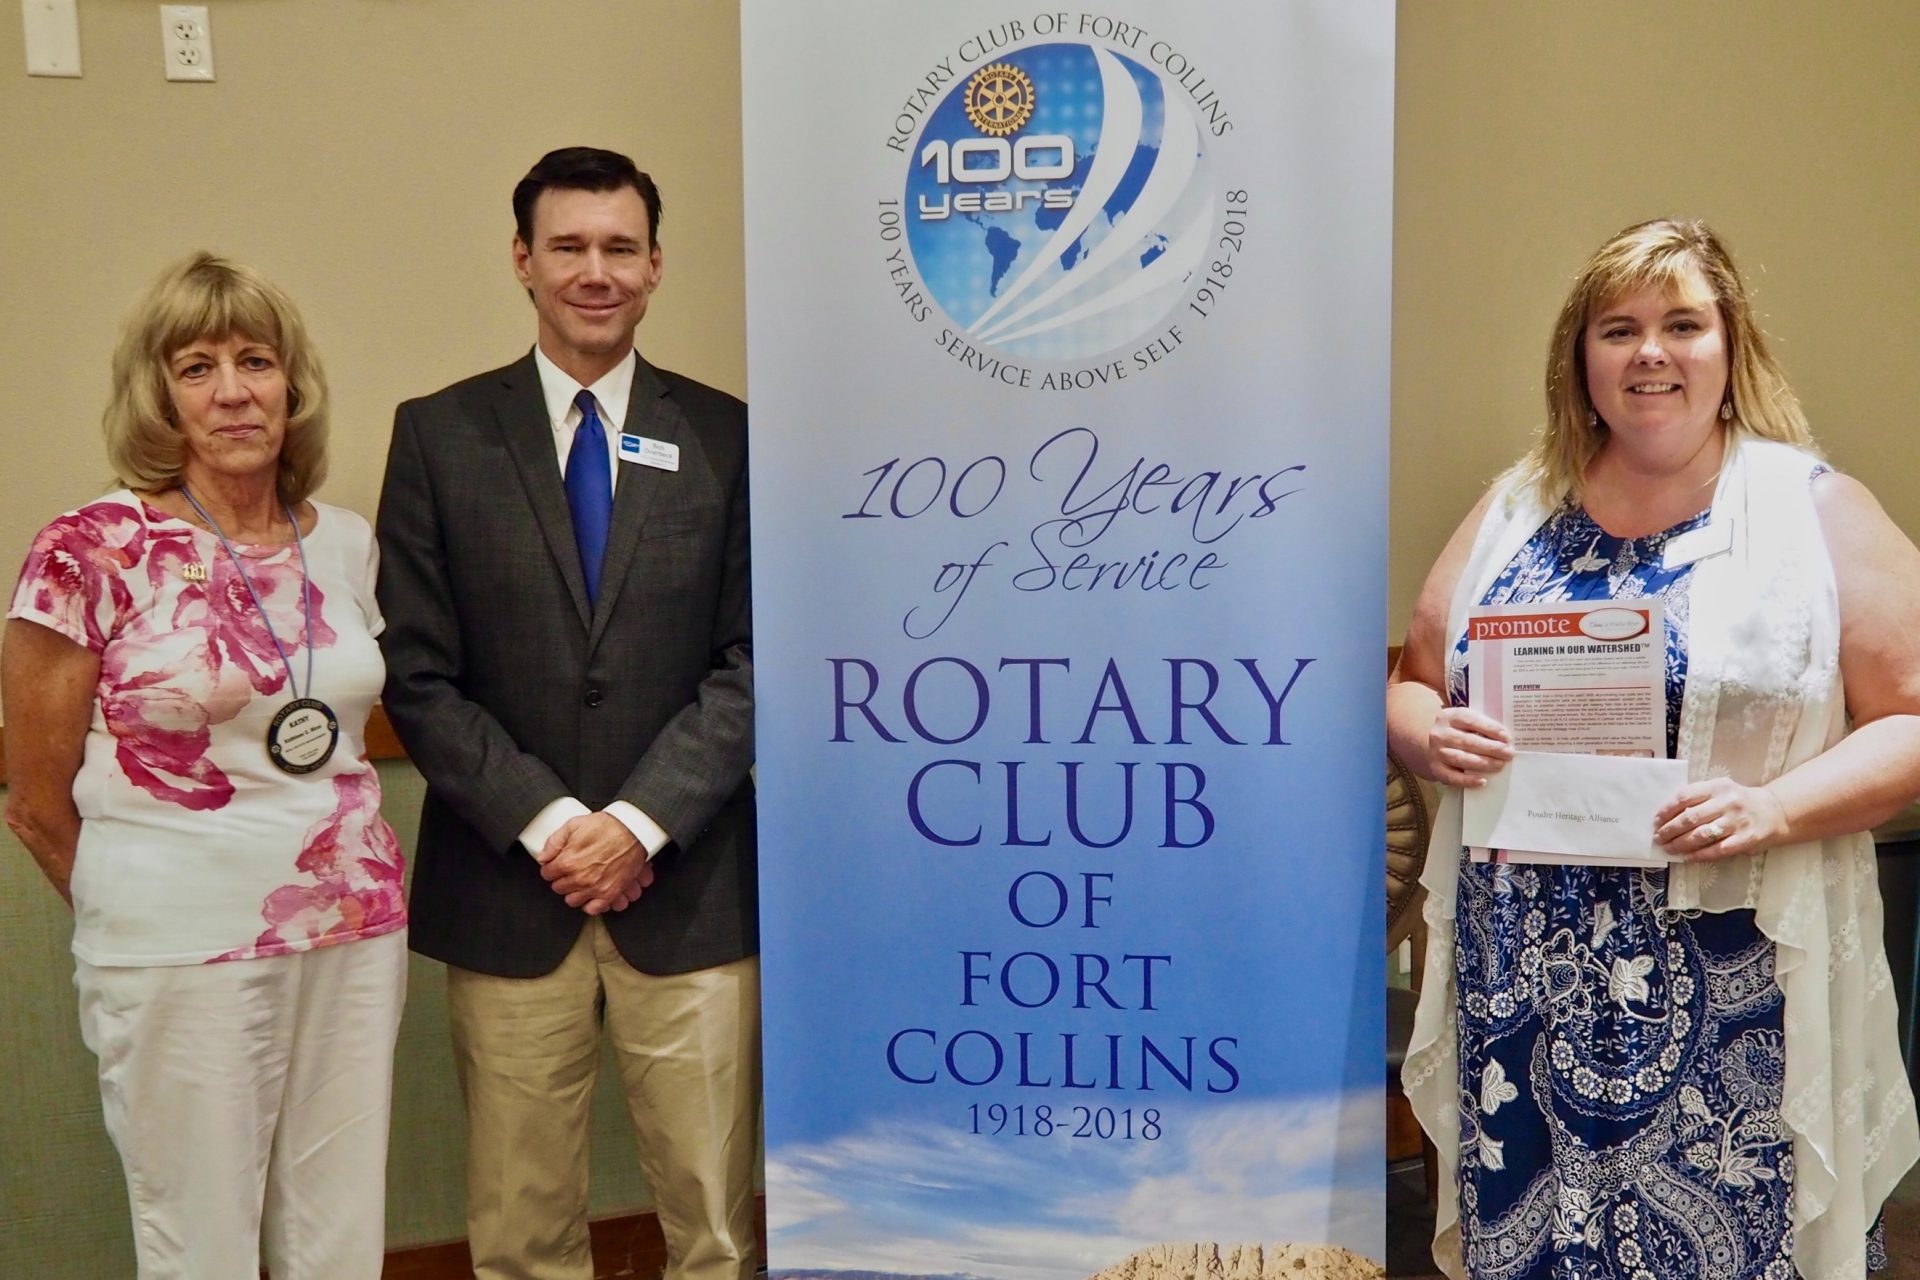 NEWS RELEASE: Rotary Club awards $4,000 grant to Poudre Heritage Alliance